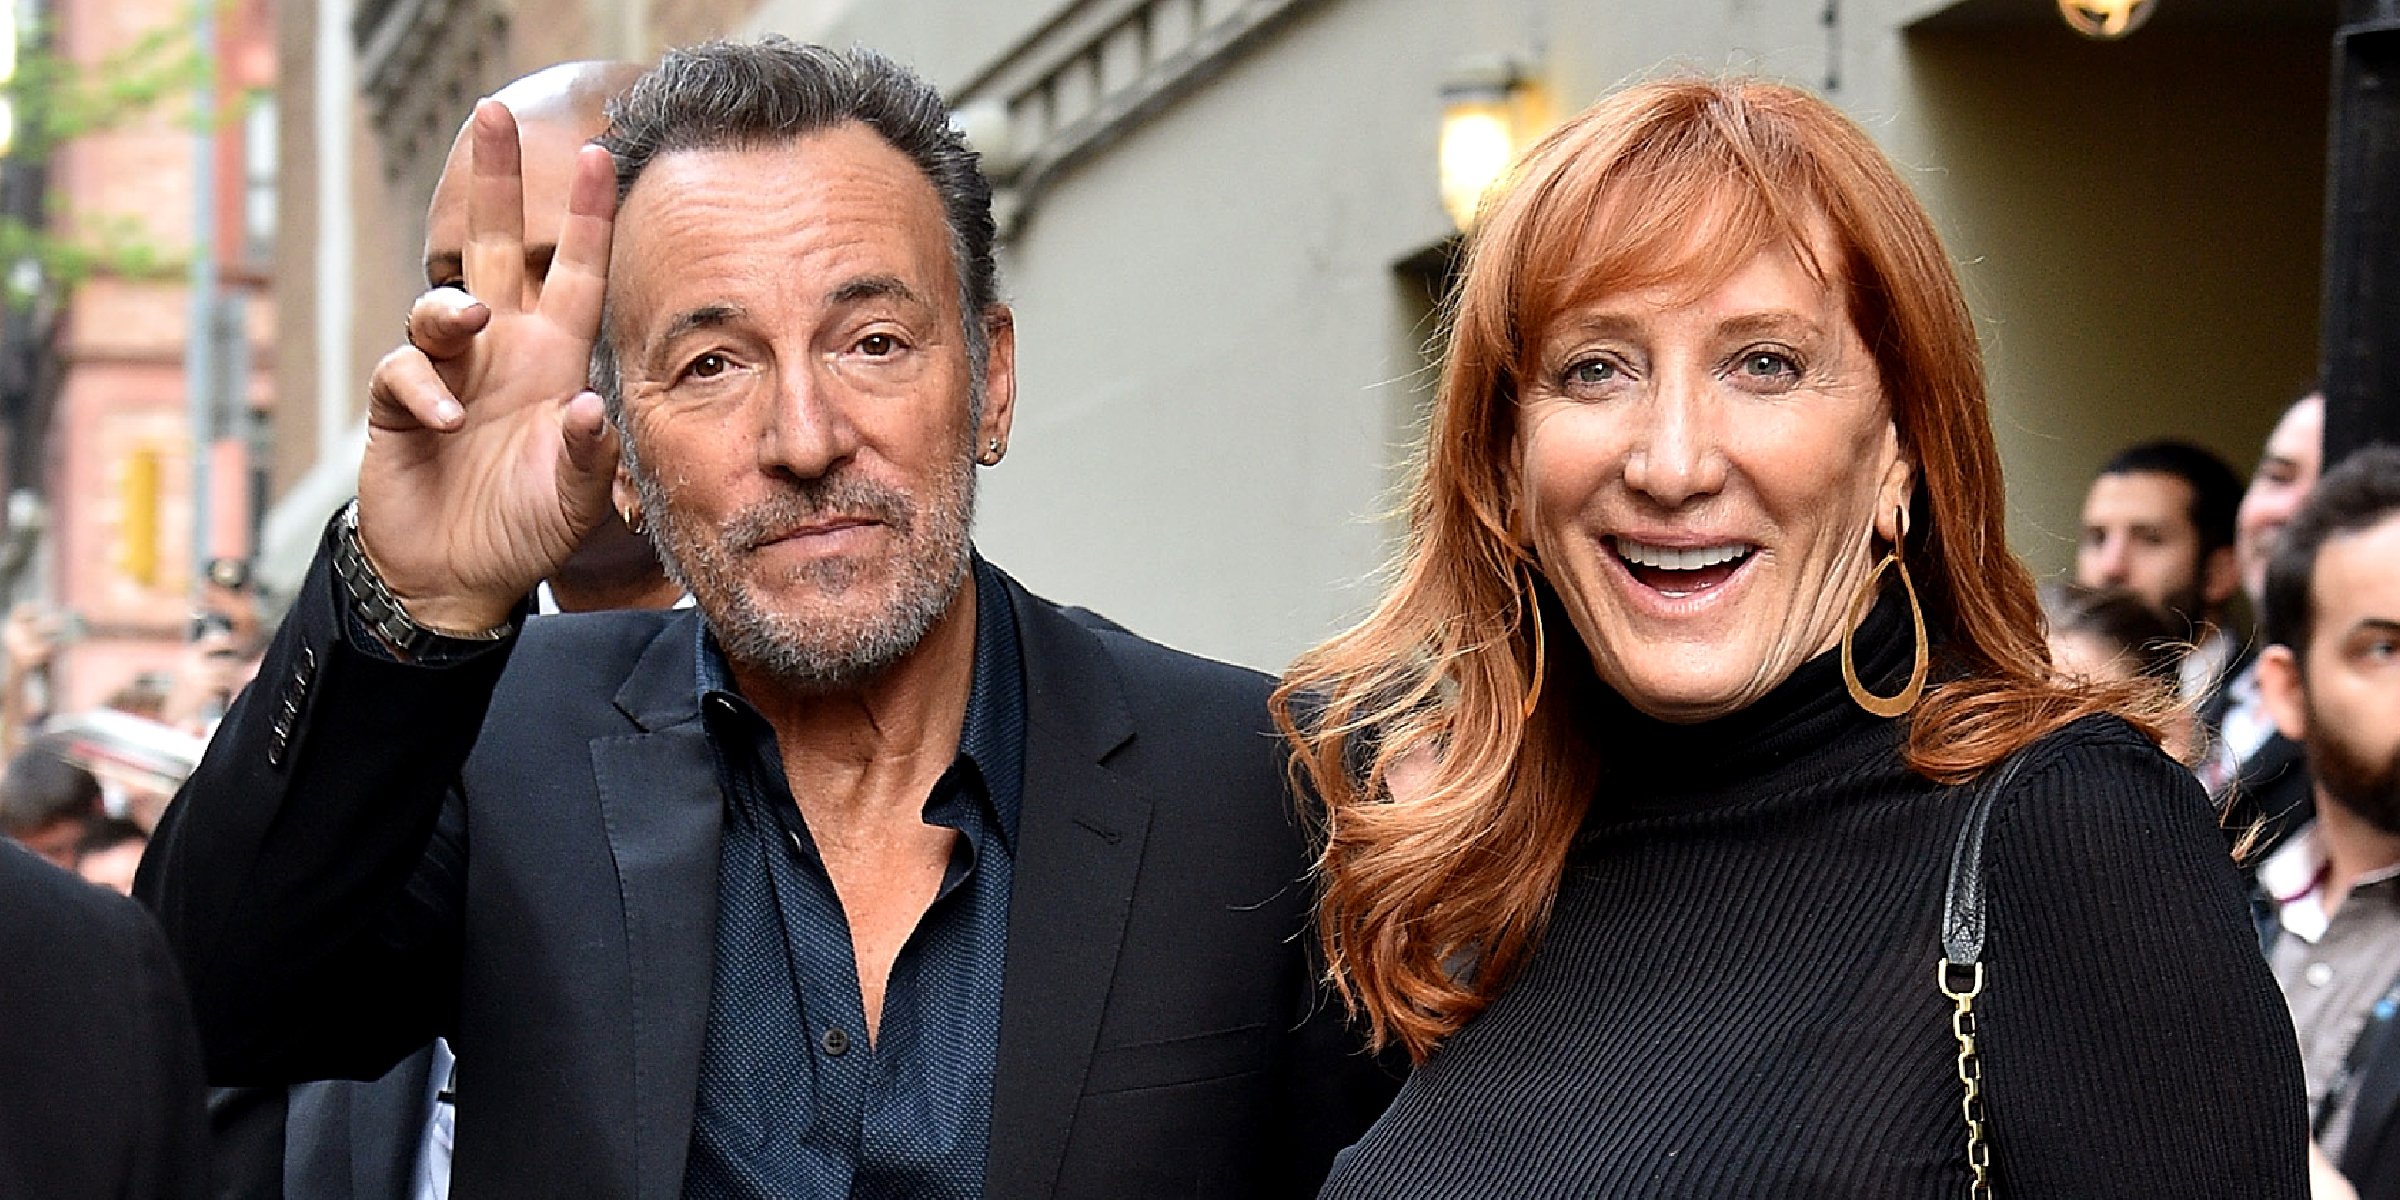 Bruce Springsteen and Patti Scialfa | Source: Getty Images